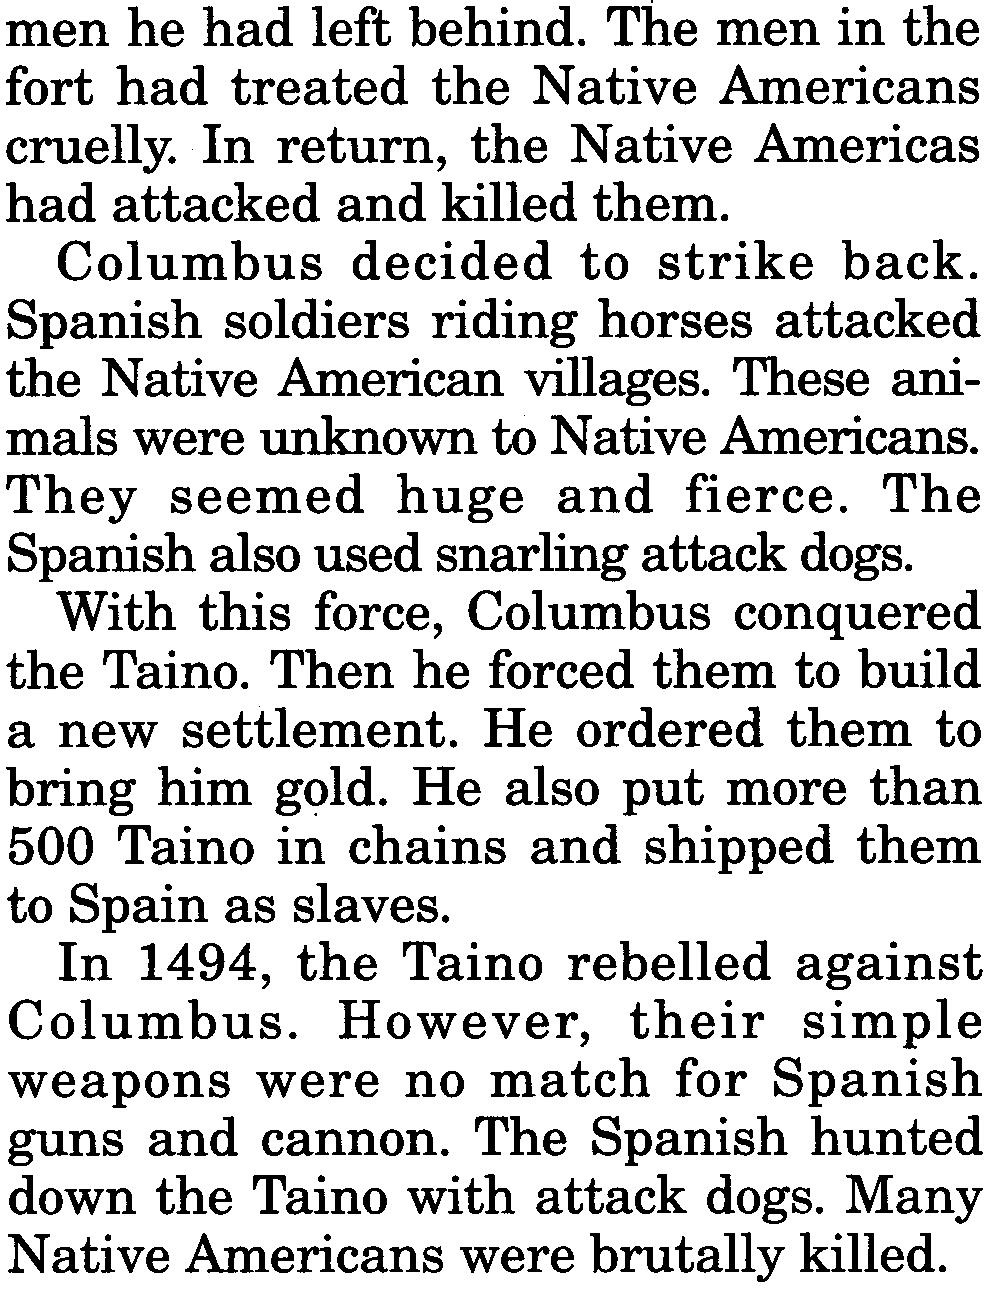 With this force, Columbus conquered the Taino. Then he forced them to build a new settlement. He ordered them to bring him gold.